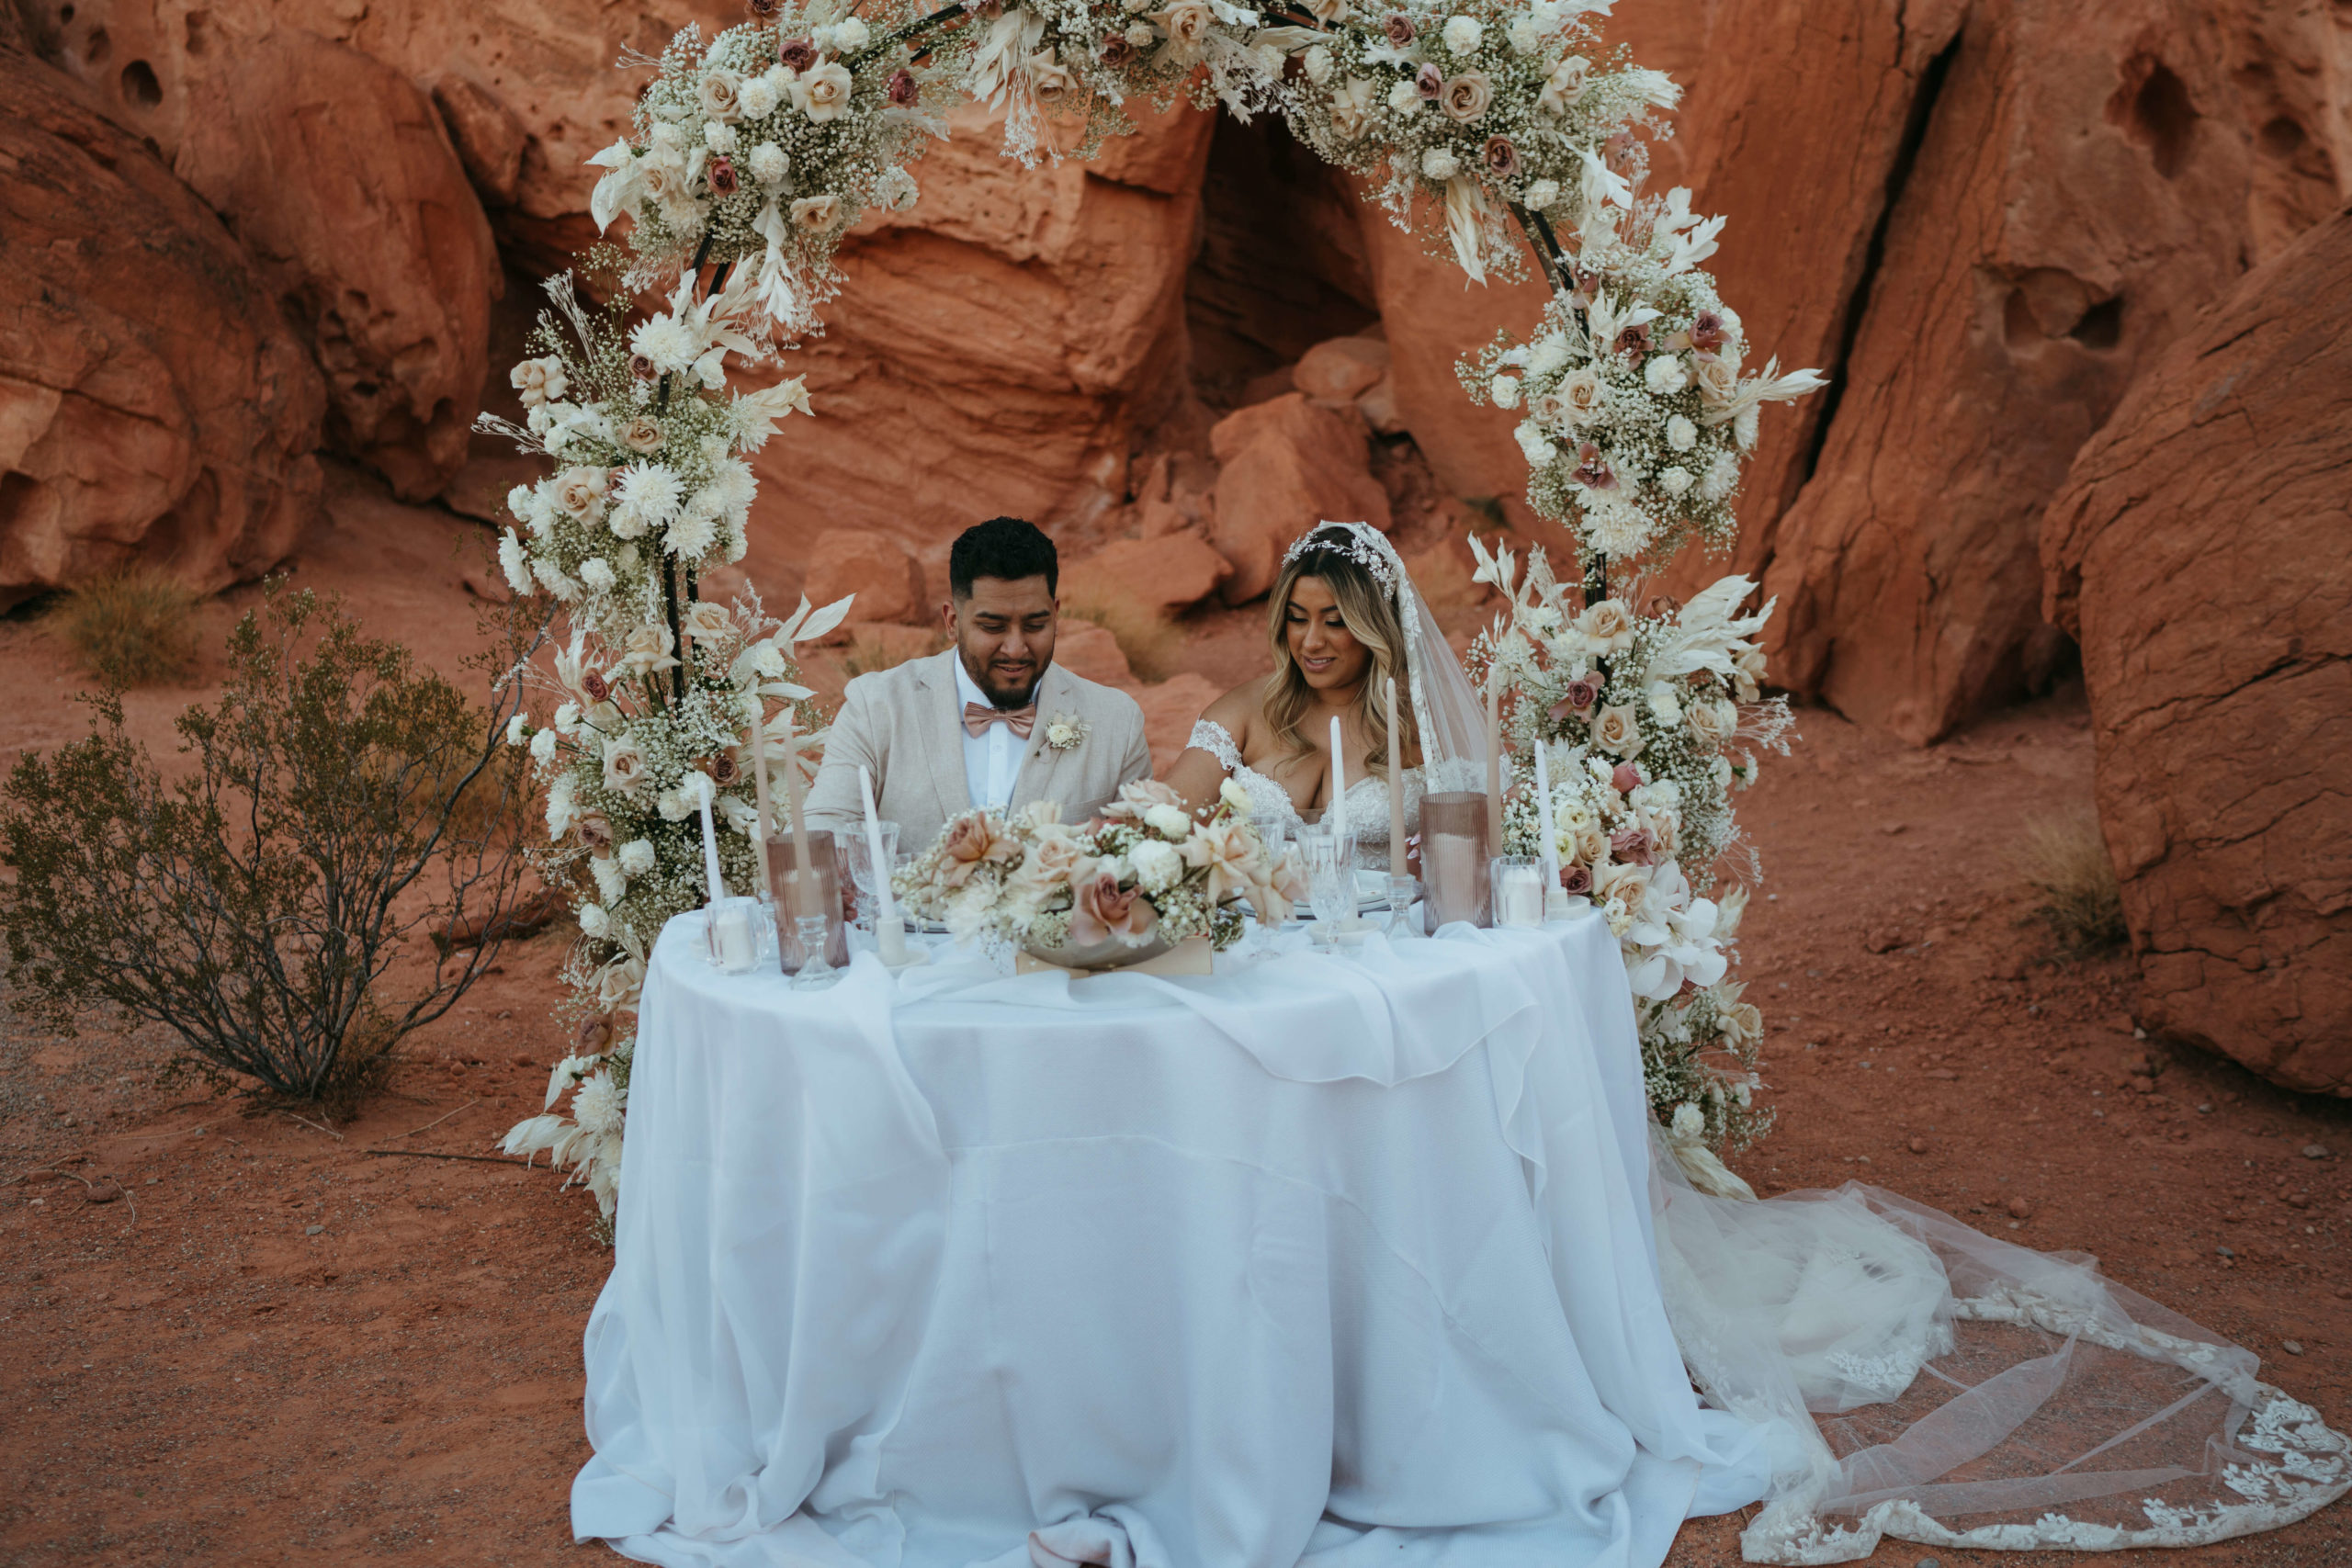 Modern Monochromatic Desert Micro-Wedding. The bride and groom at the sweetheart table draped in white linen with monochromatic candles and votives in front of the floral arch in the desert 